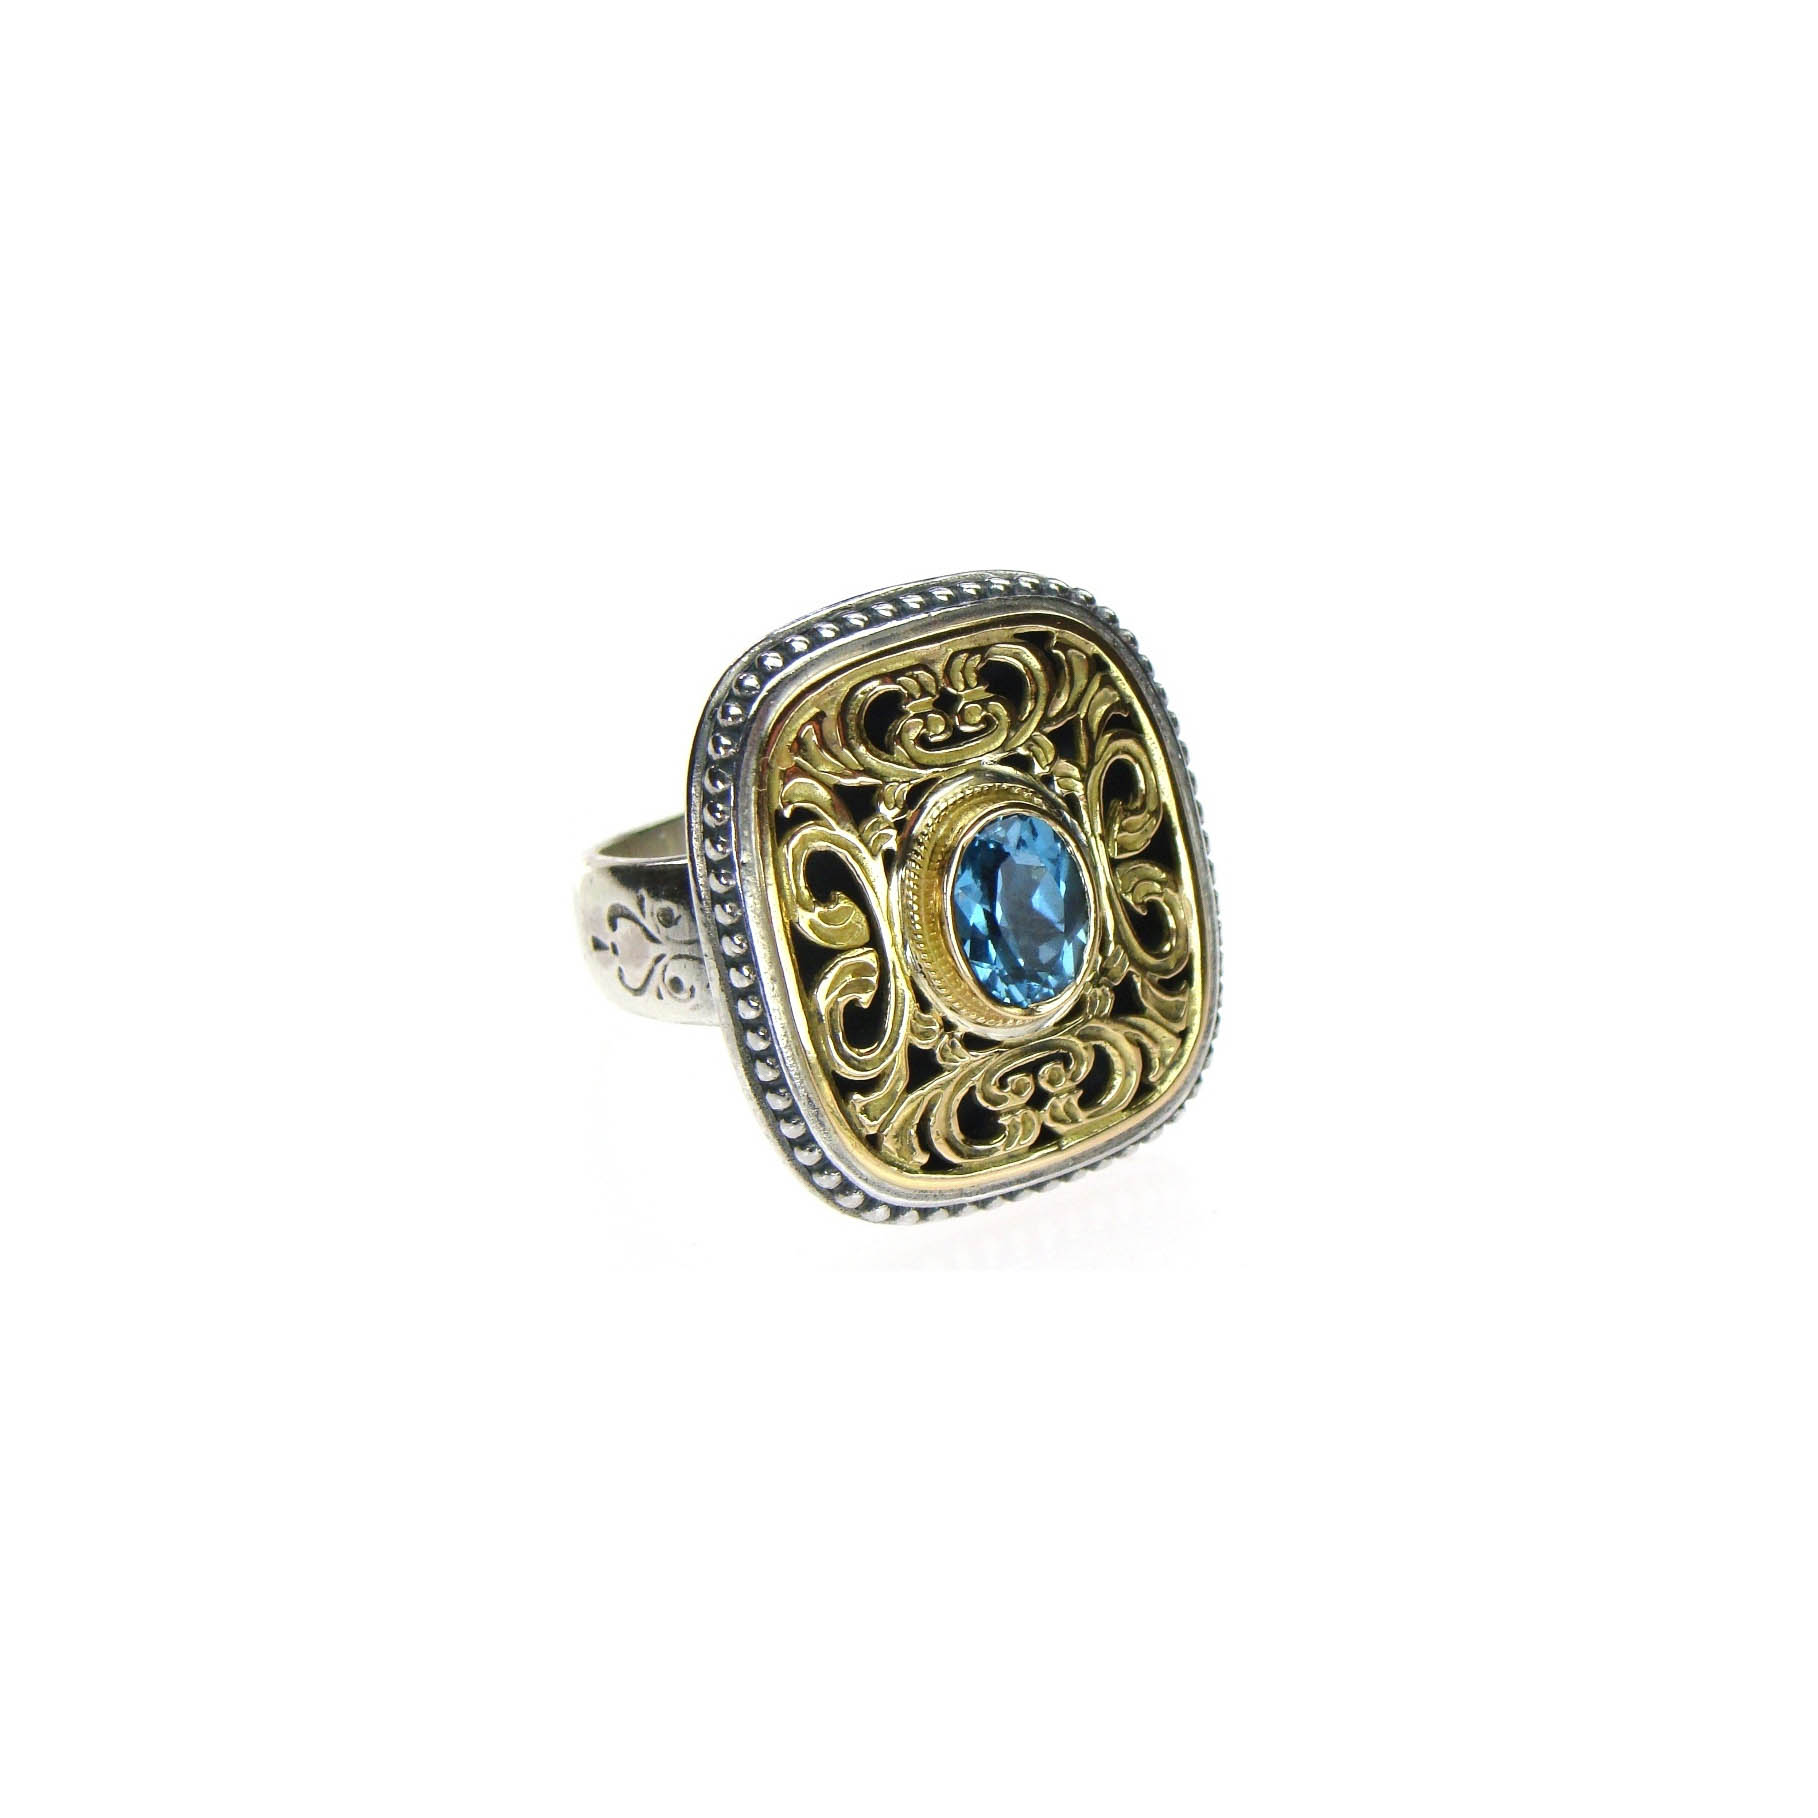 Garden shadows flat ring in 18K Gold and sterling silver with blue topaz